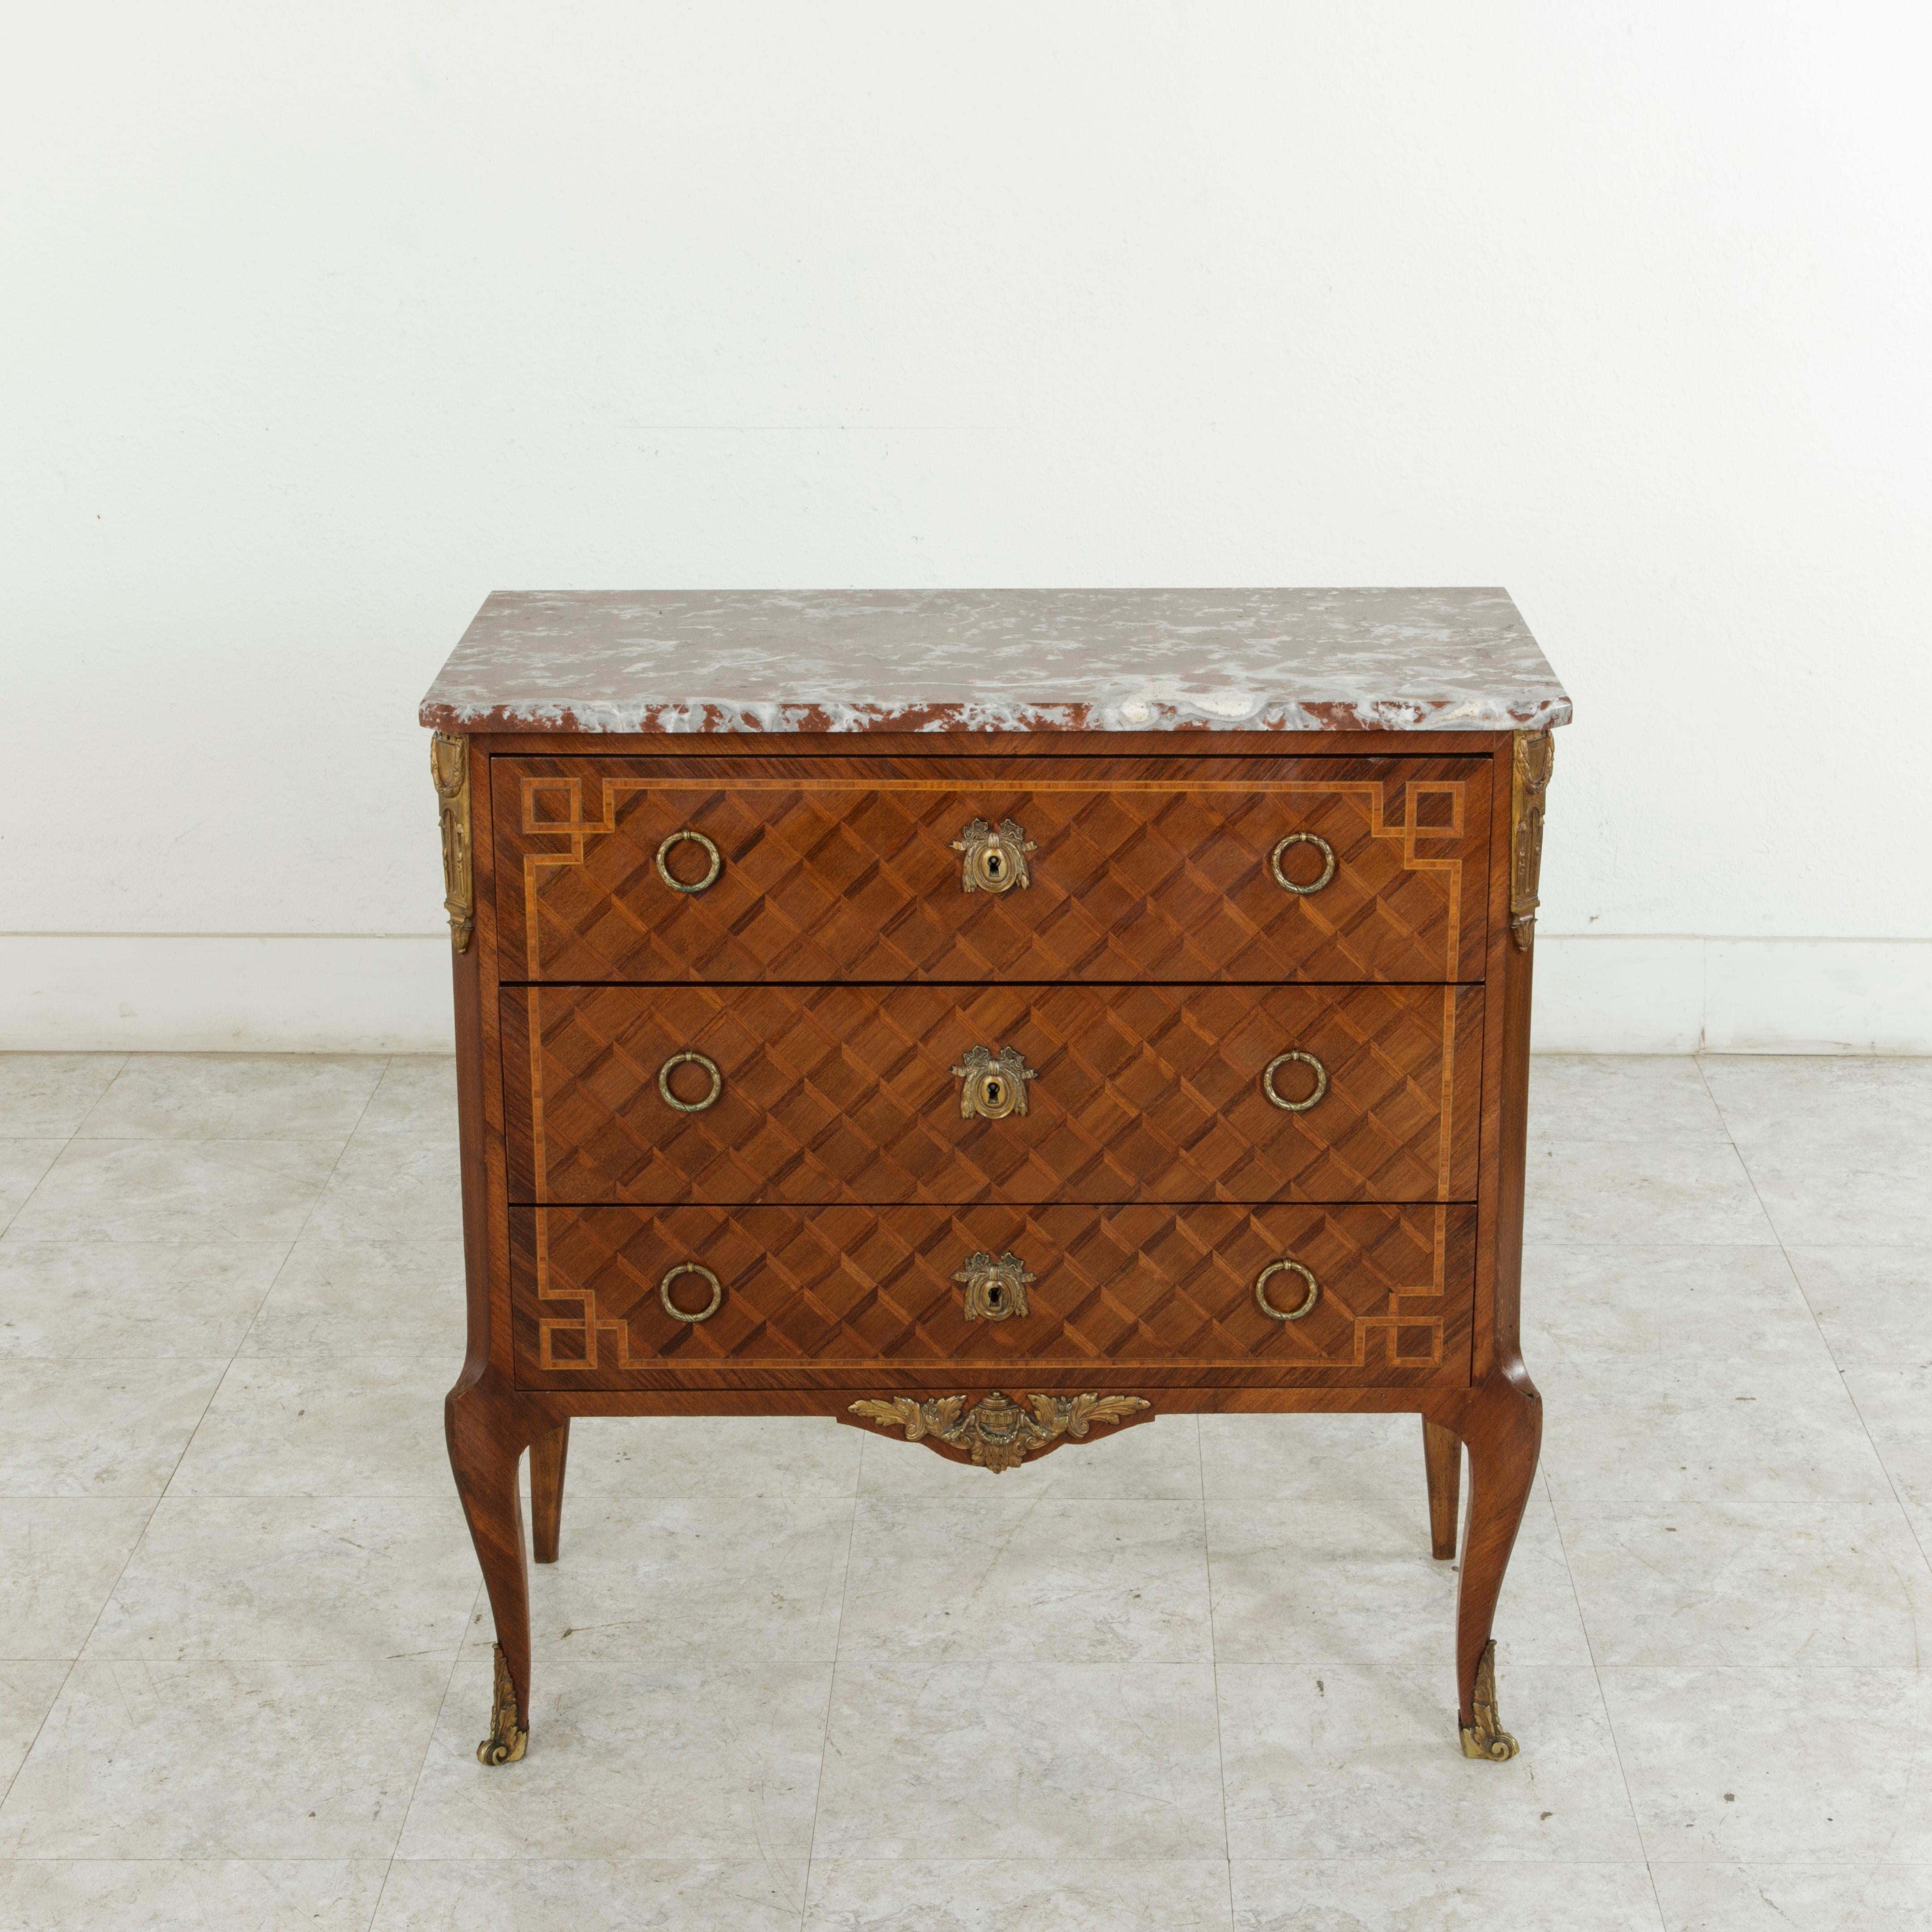 This late 19th century Louis XV-Louis XVI transition style chest features a rosewood and walnut marquetry facade in a geometric diamond pattern and is finished with a griotte marble top. Bronze ormolu detailed with hanging garlands are mounted on